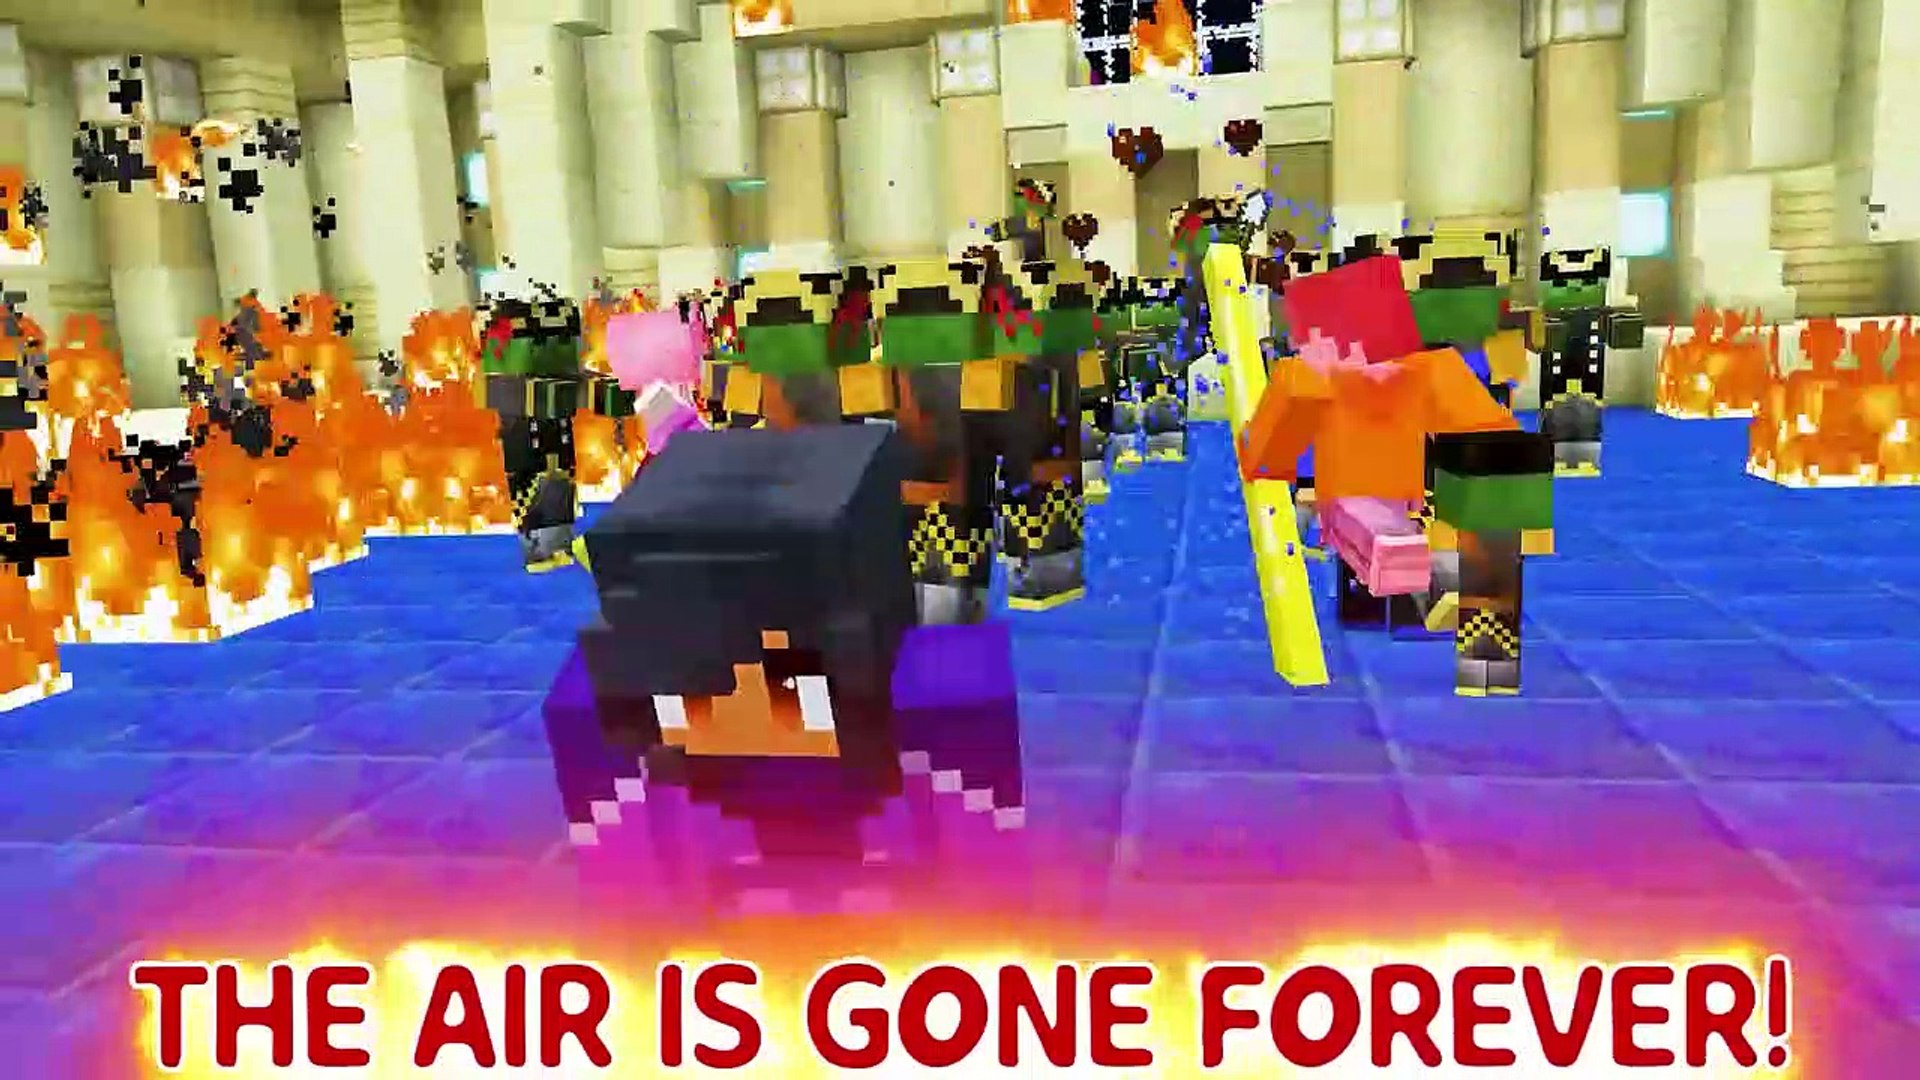 Escape BARRY'S PRISON in Minecraft! - video Dailymotion